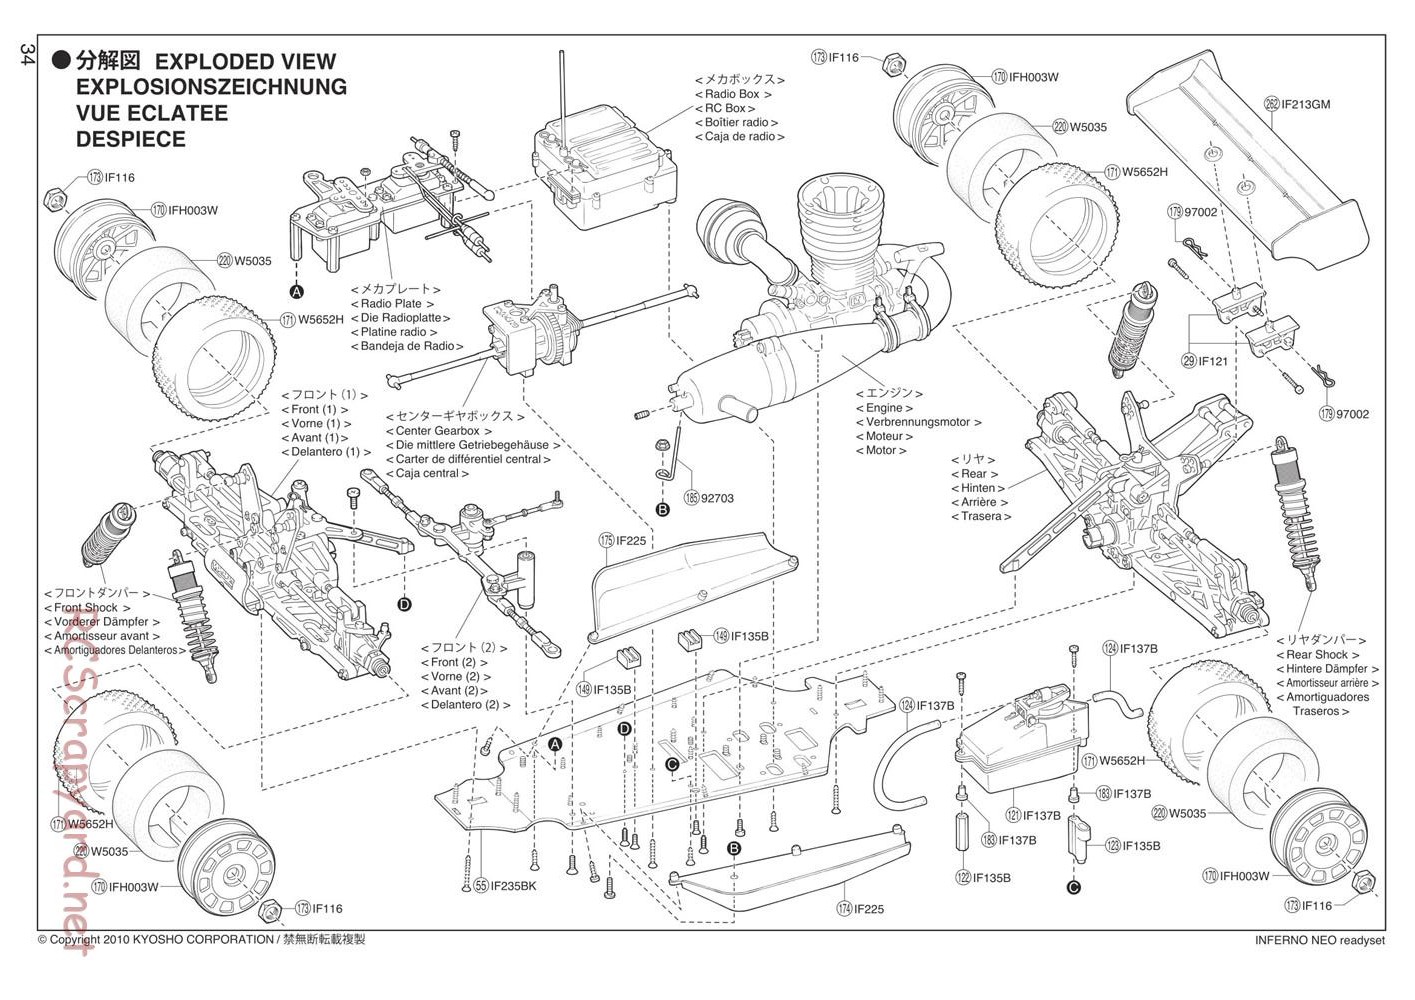 Kyosho - Inferno Neo - Exploded Views - Page 1